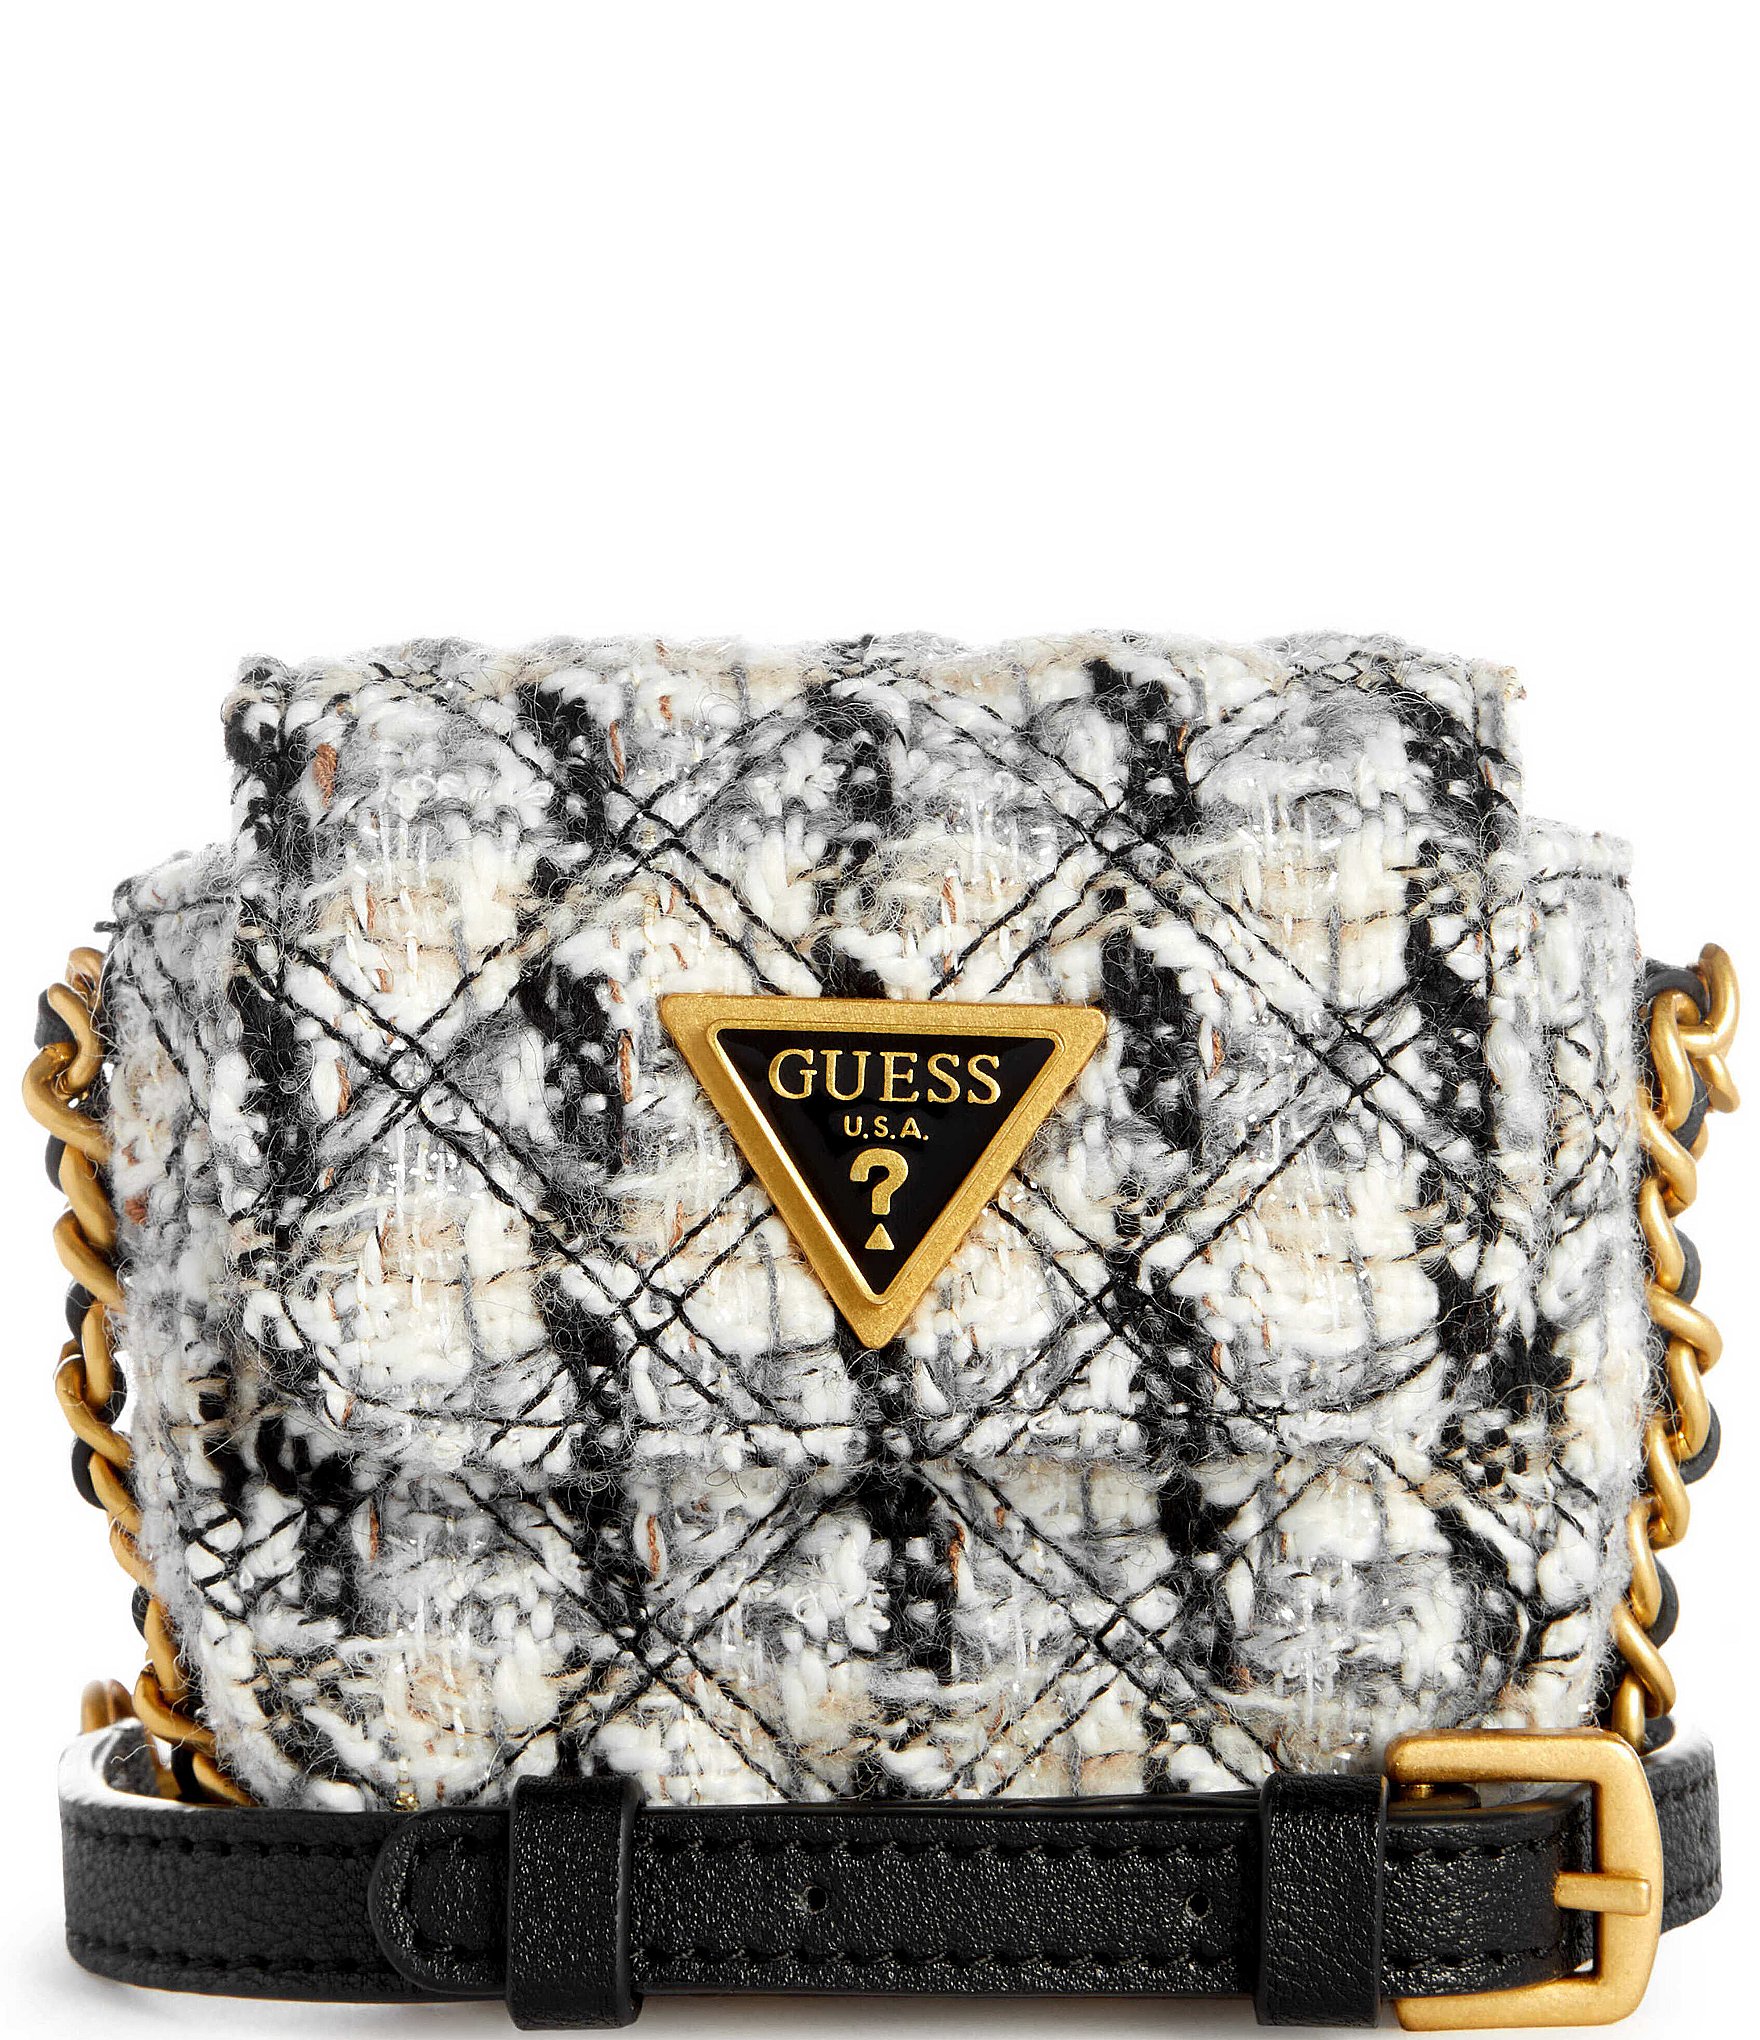 Guess Giully Quilted Tweed Mini Convertible Crossbody Bag - Grey Multi